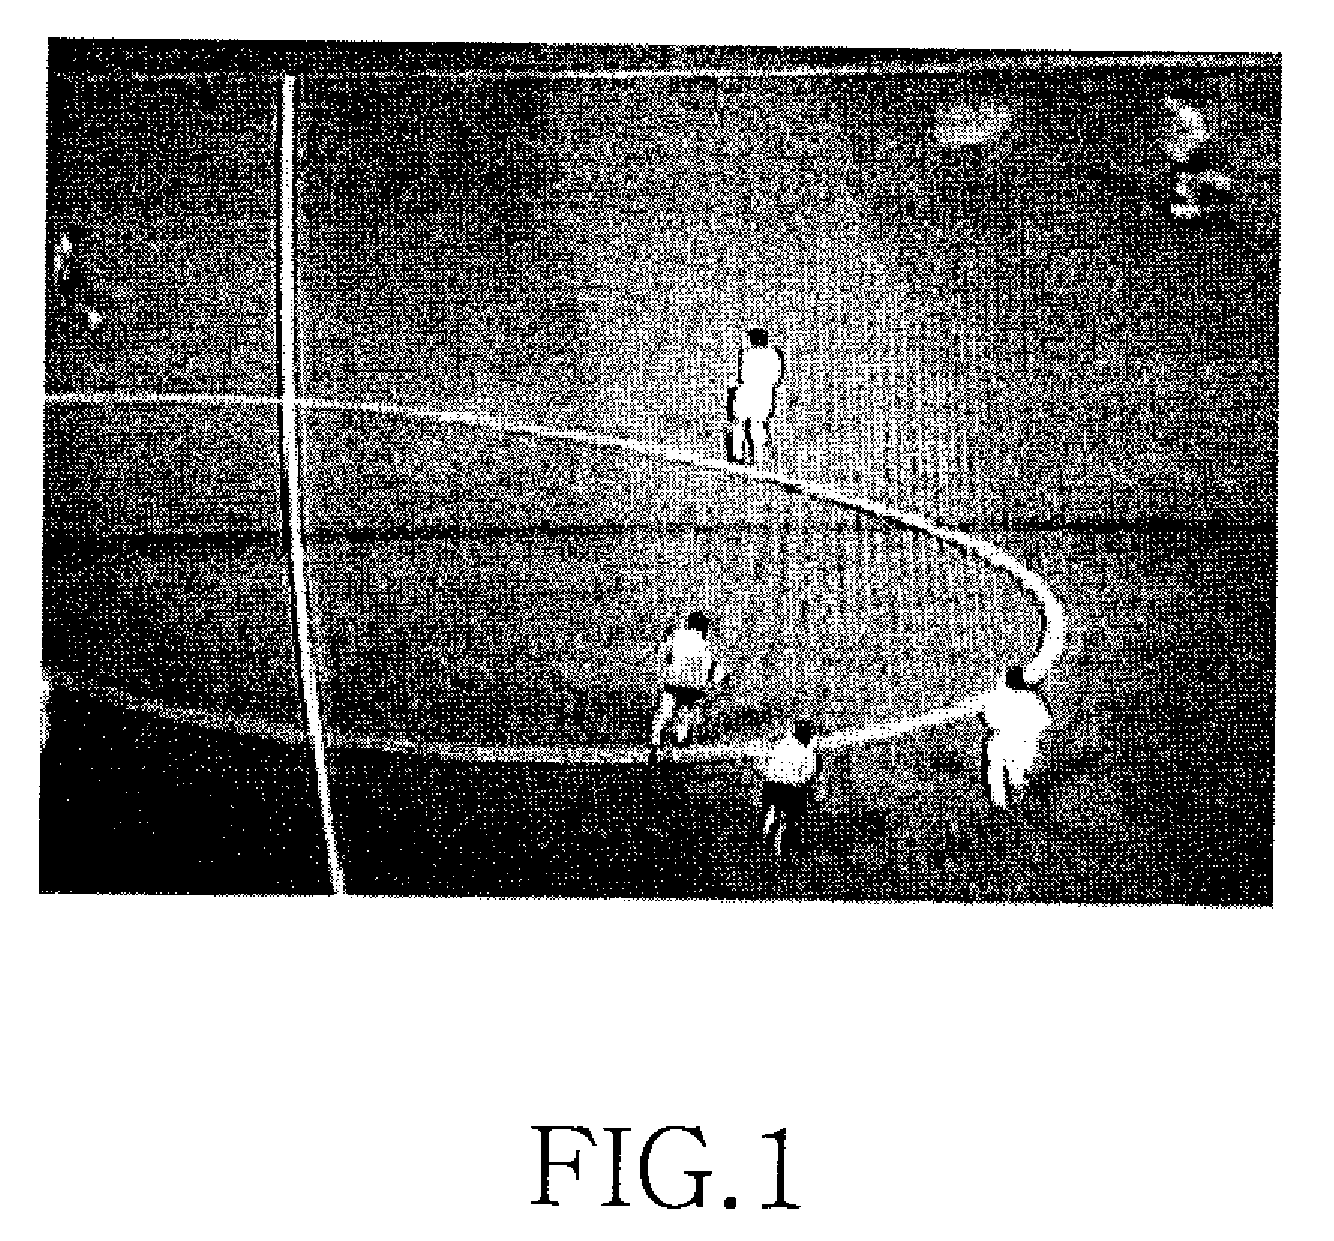 System and method for providing position information by using mini-map